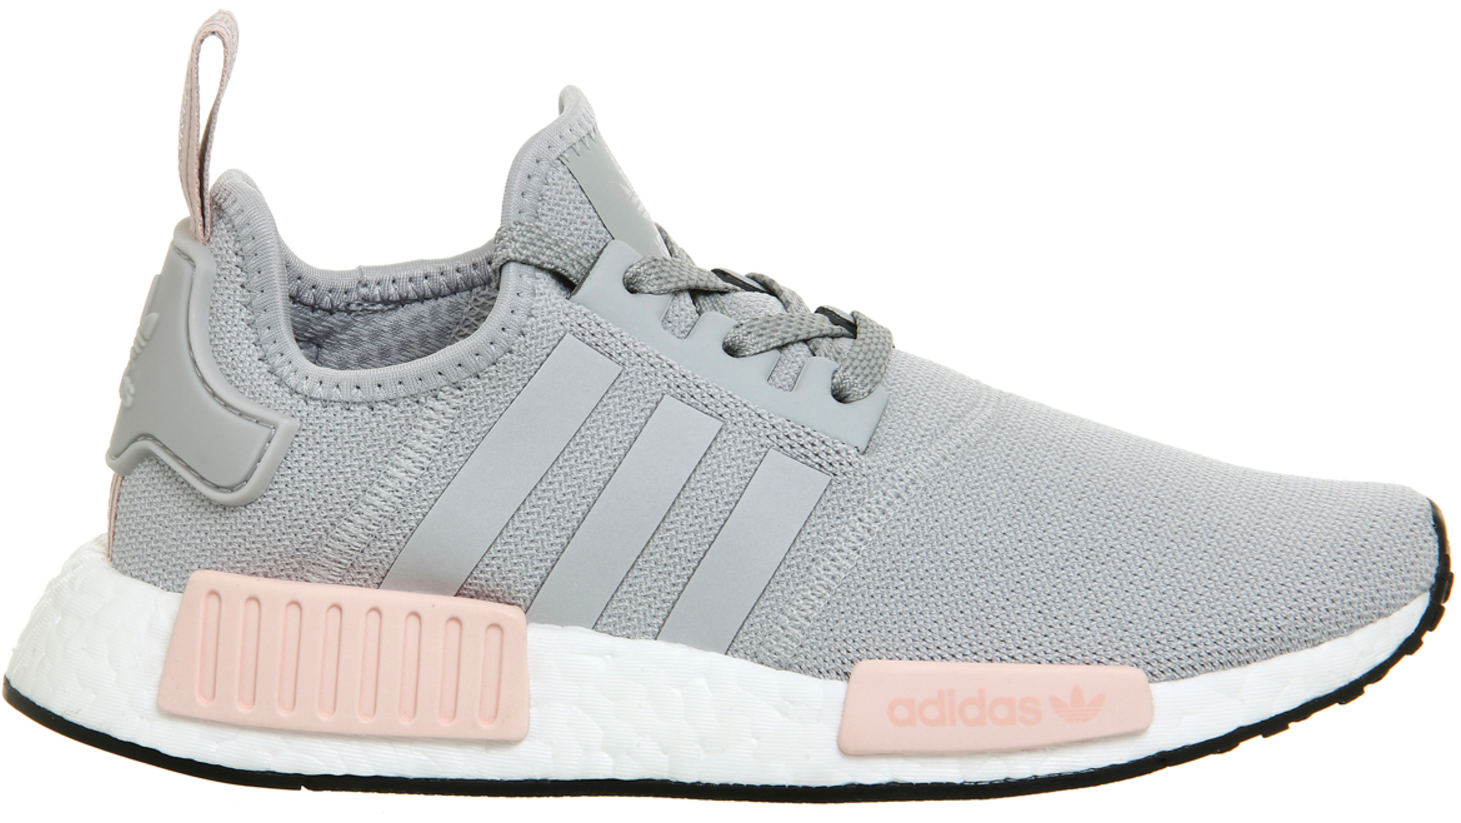 nmd vapour pink